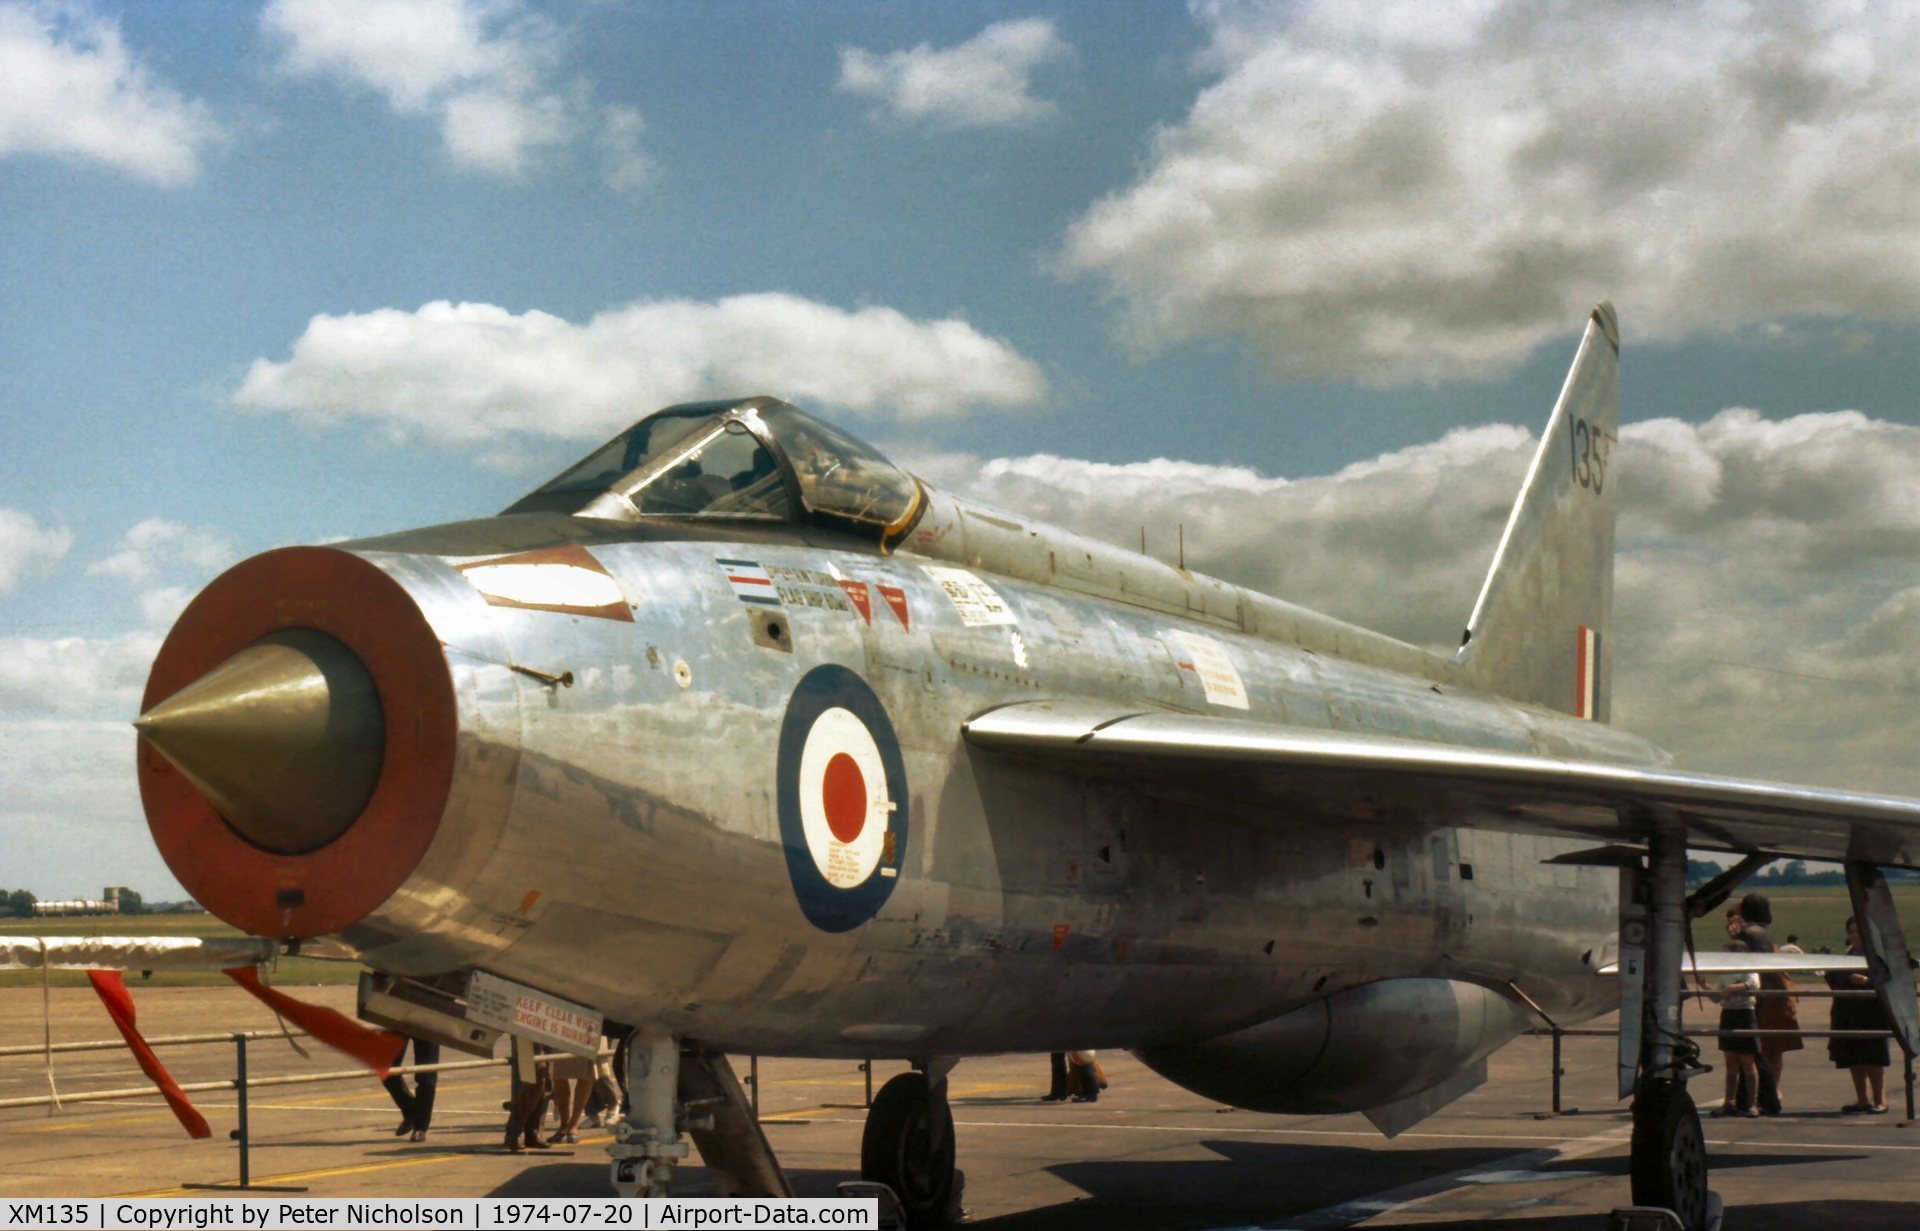 XM135, 1959 English Electric Lightning F.1 C/N 95031, As Lightning F.1A in 1974 it was the flagship of 60 Maintenance Unit displayed at the 1974 RAF Leconfield Air Show.